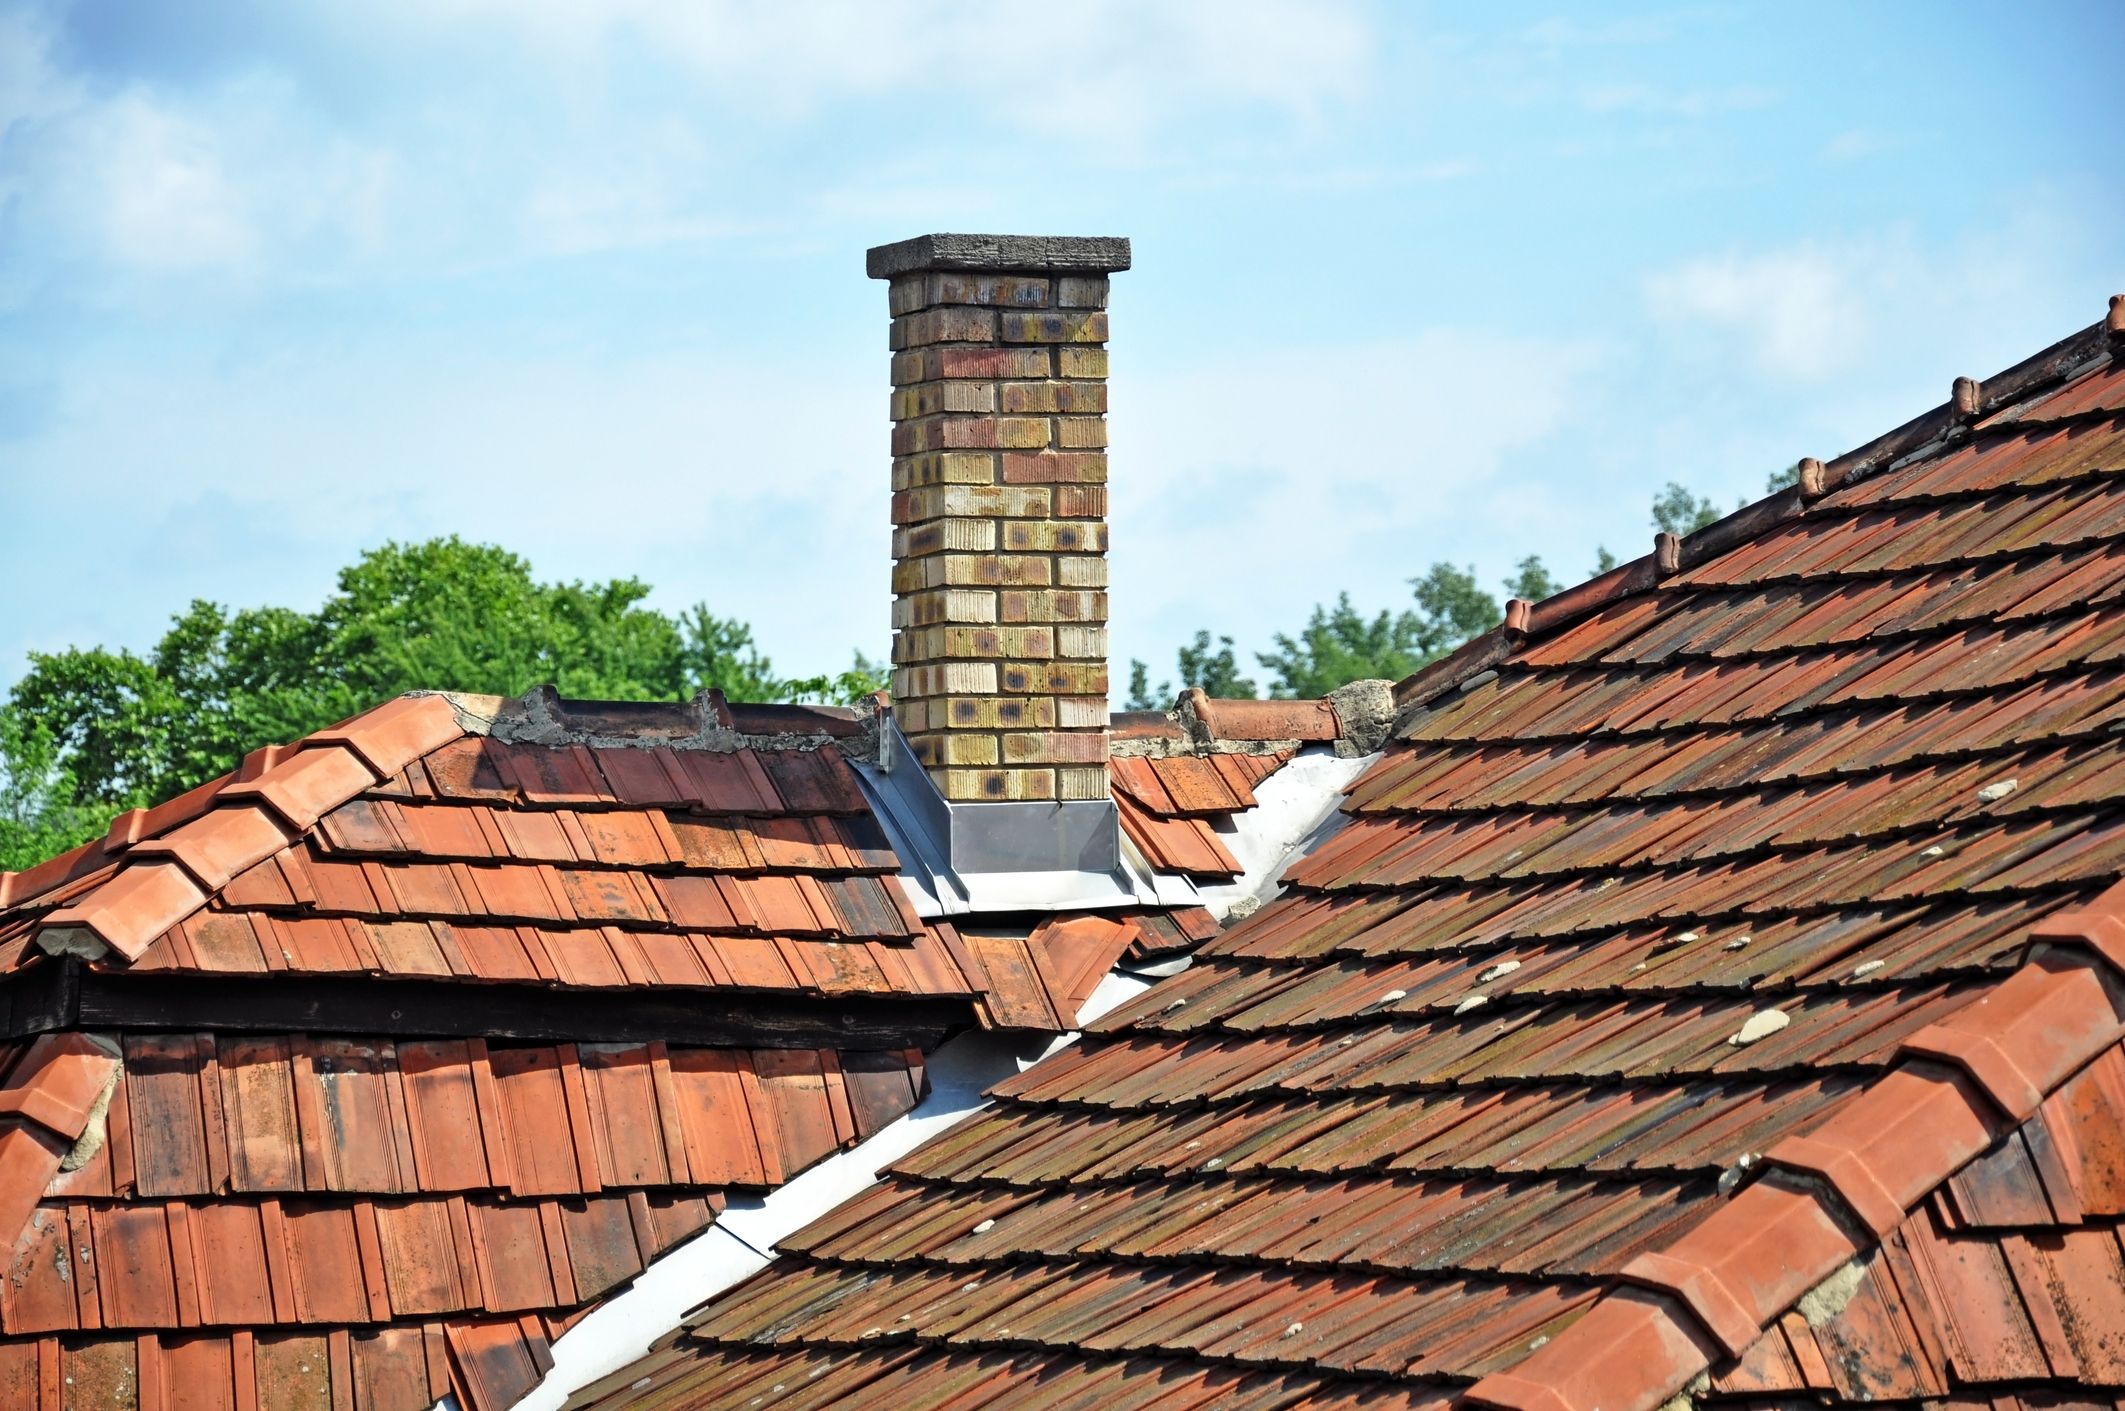 9 steps to protect your roof from storms, heavy rain, wind, ice and snow